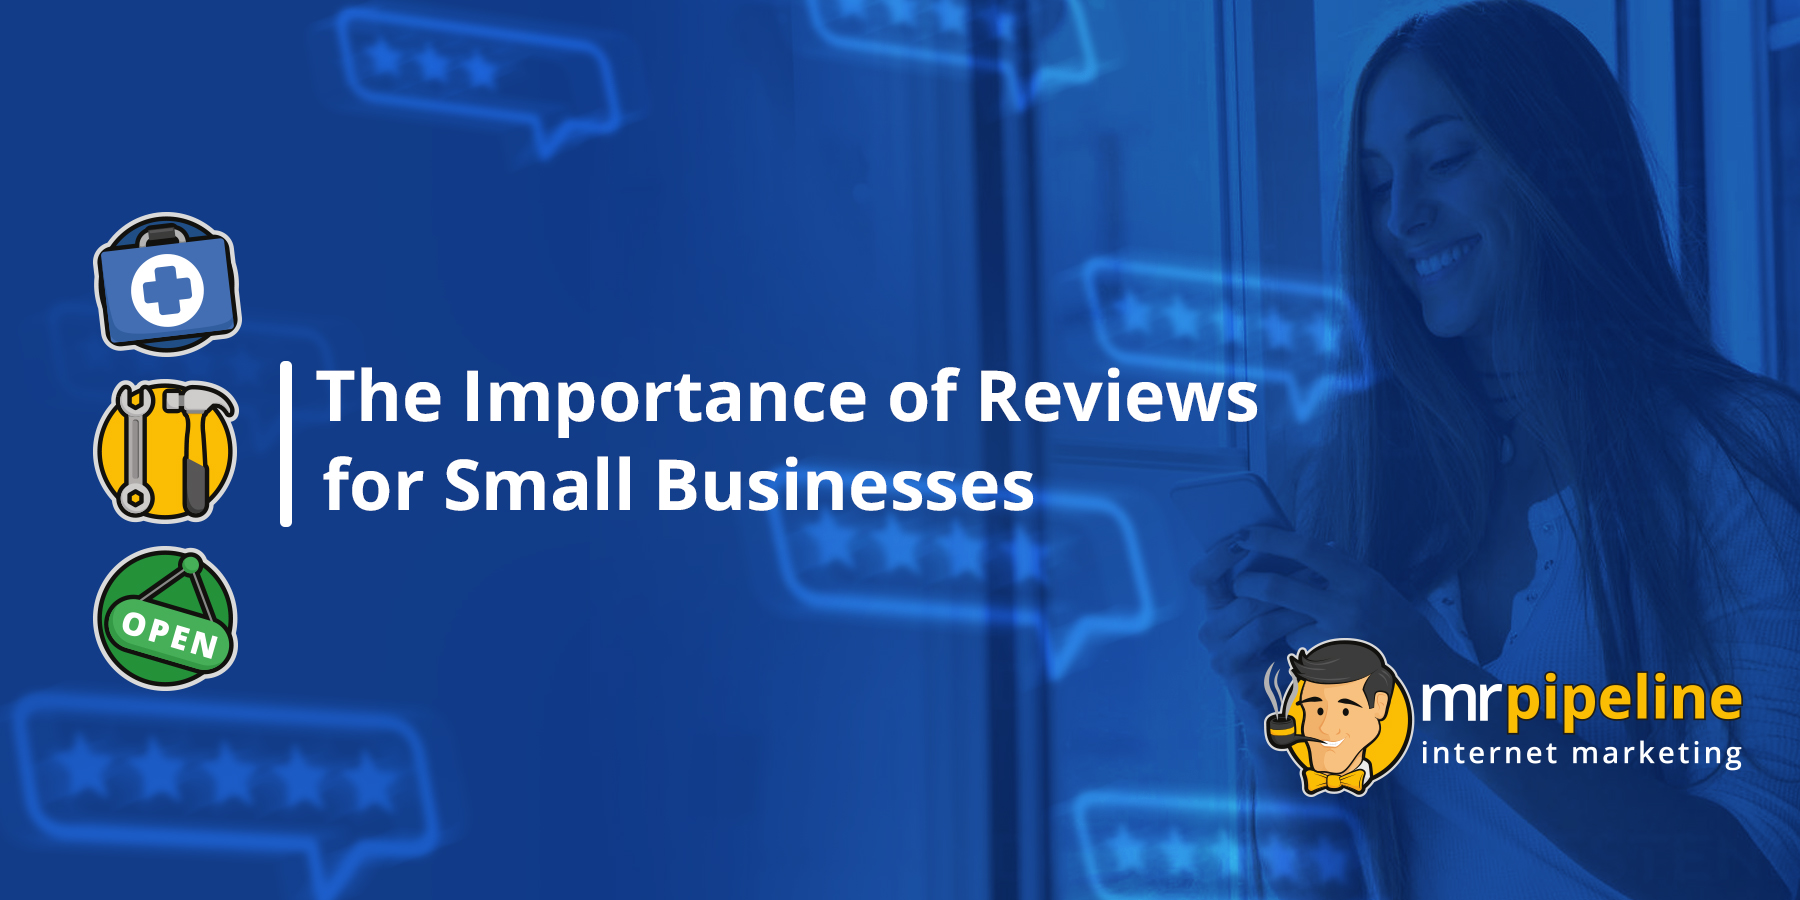 The Importance of Reviews for Small Businesses